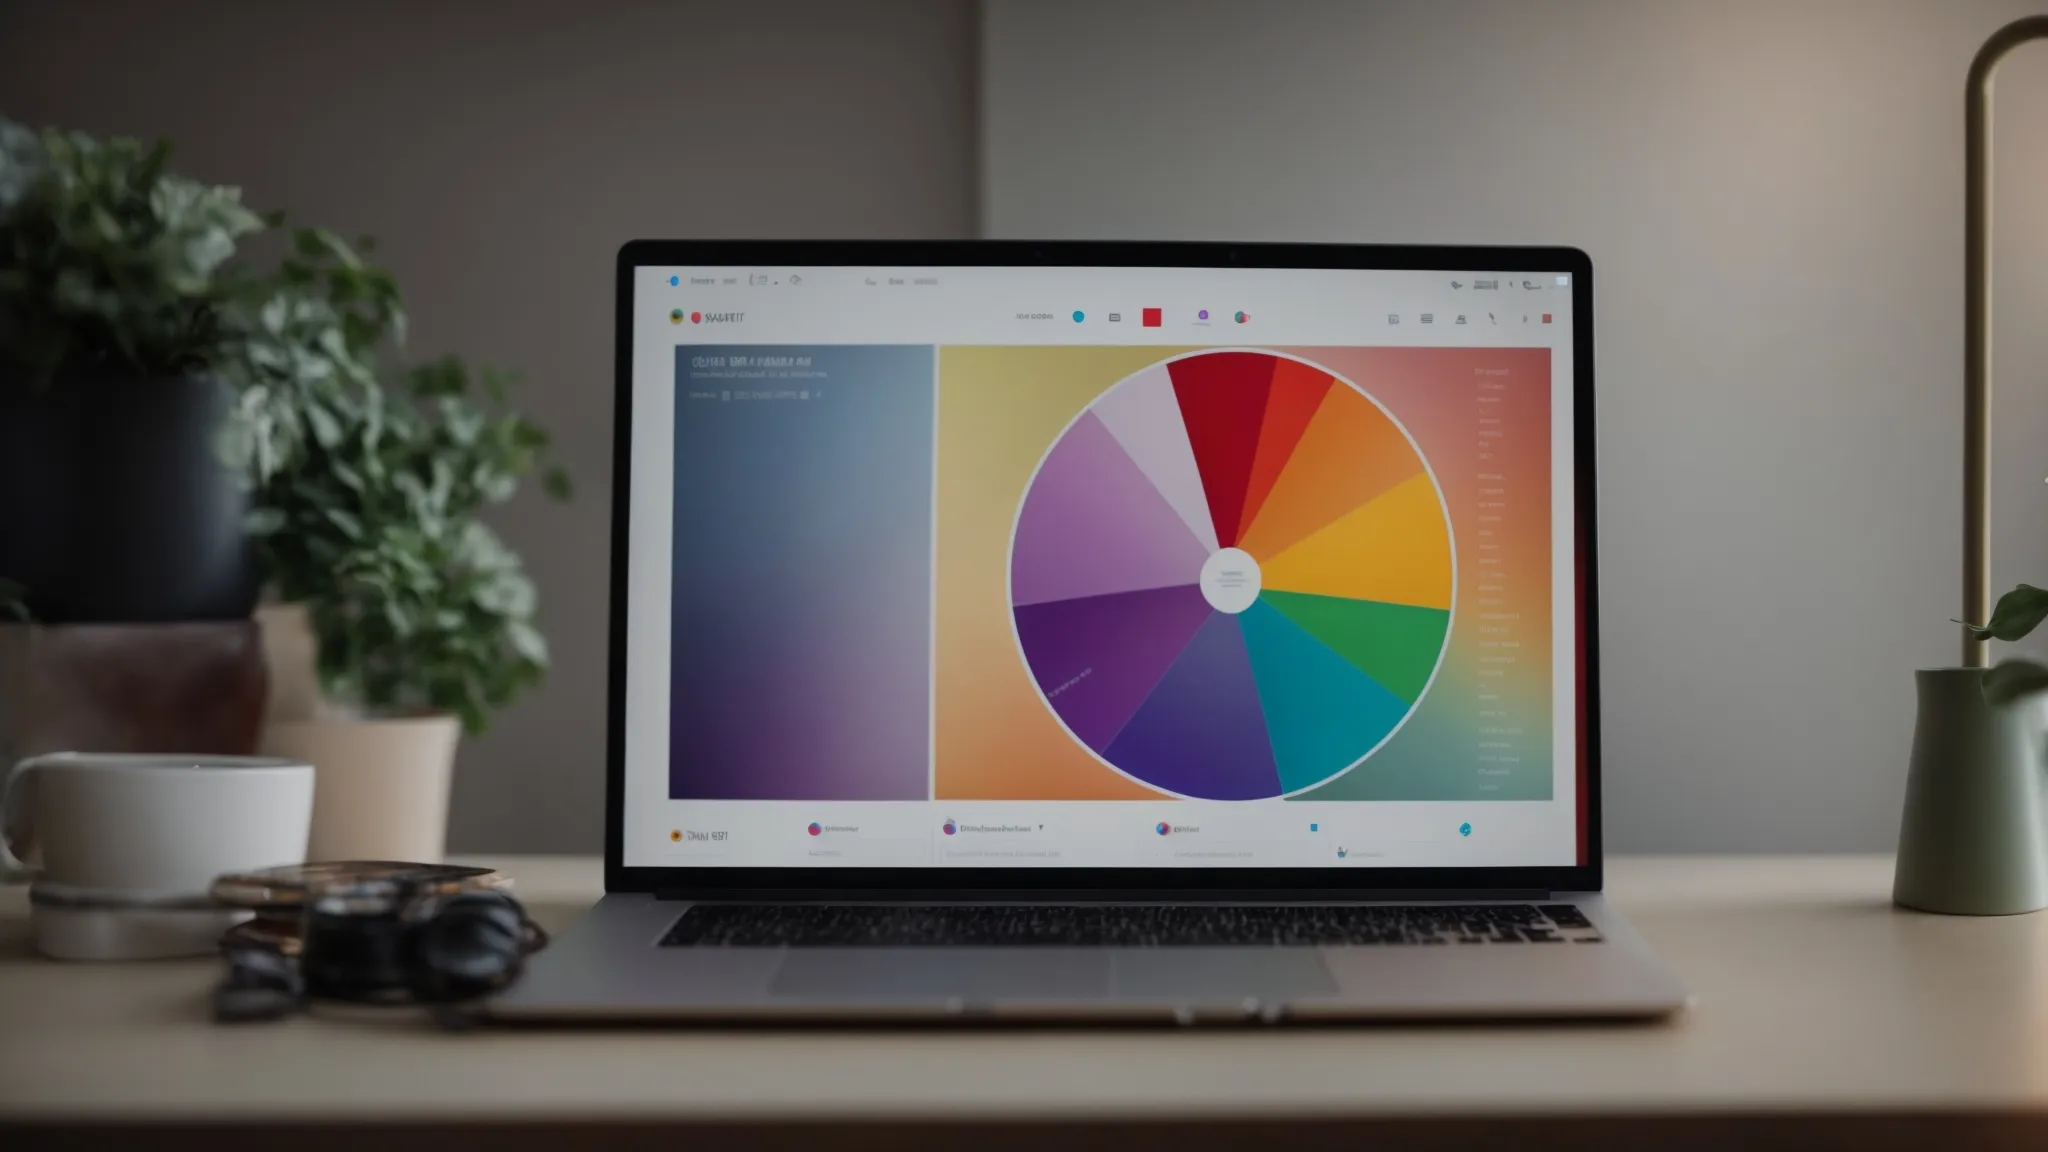 a person analyzing a colorful pie chart displayed on a laptop screen, essential for strategizing their youtube keyword deployment.